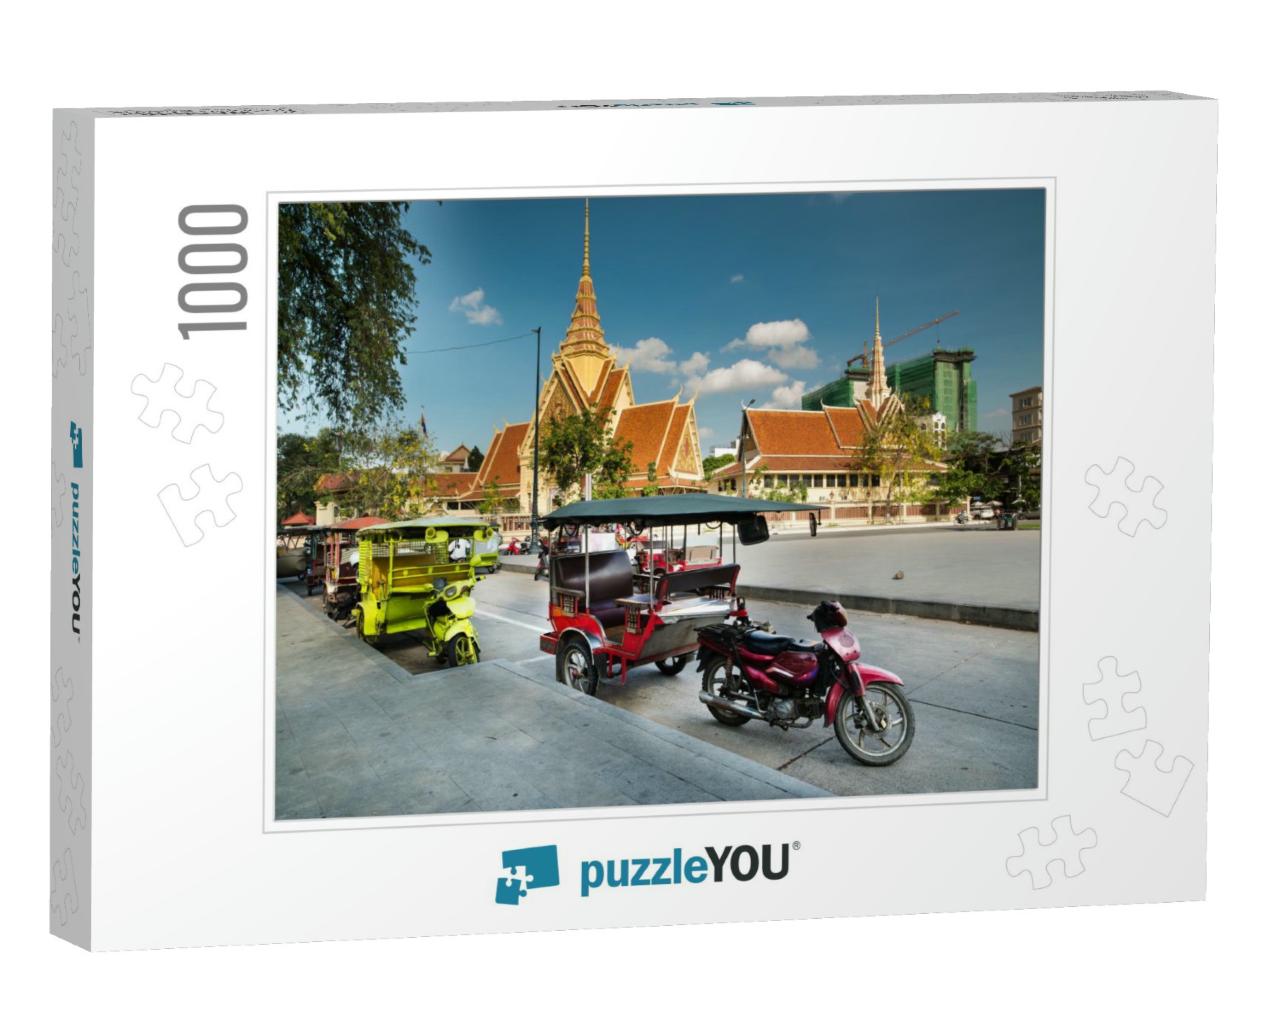 Tuk Tuk Taxi. Cambodia... Jigsaw Puzzle with 1000 pieces